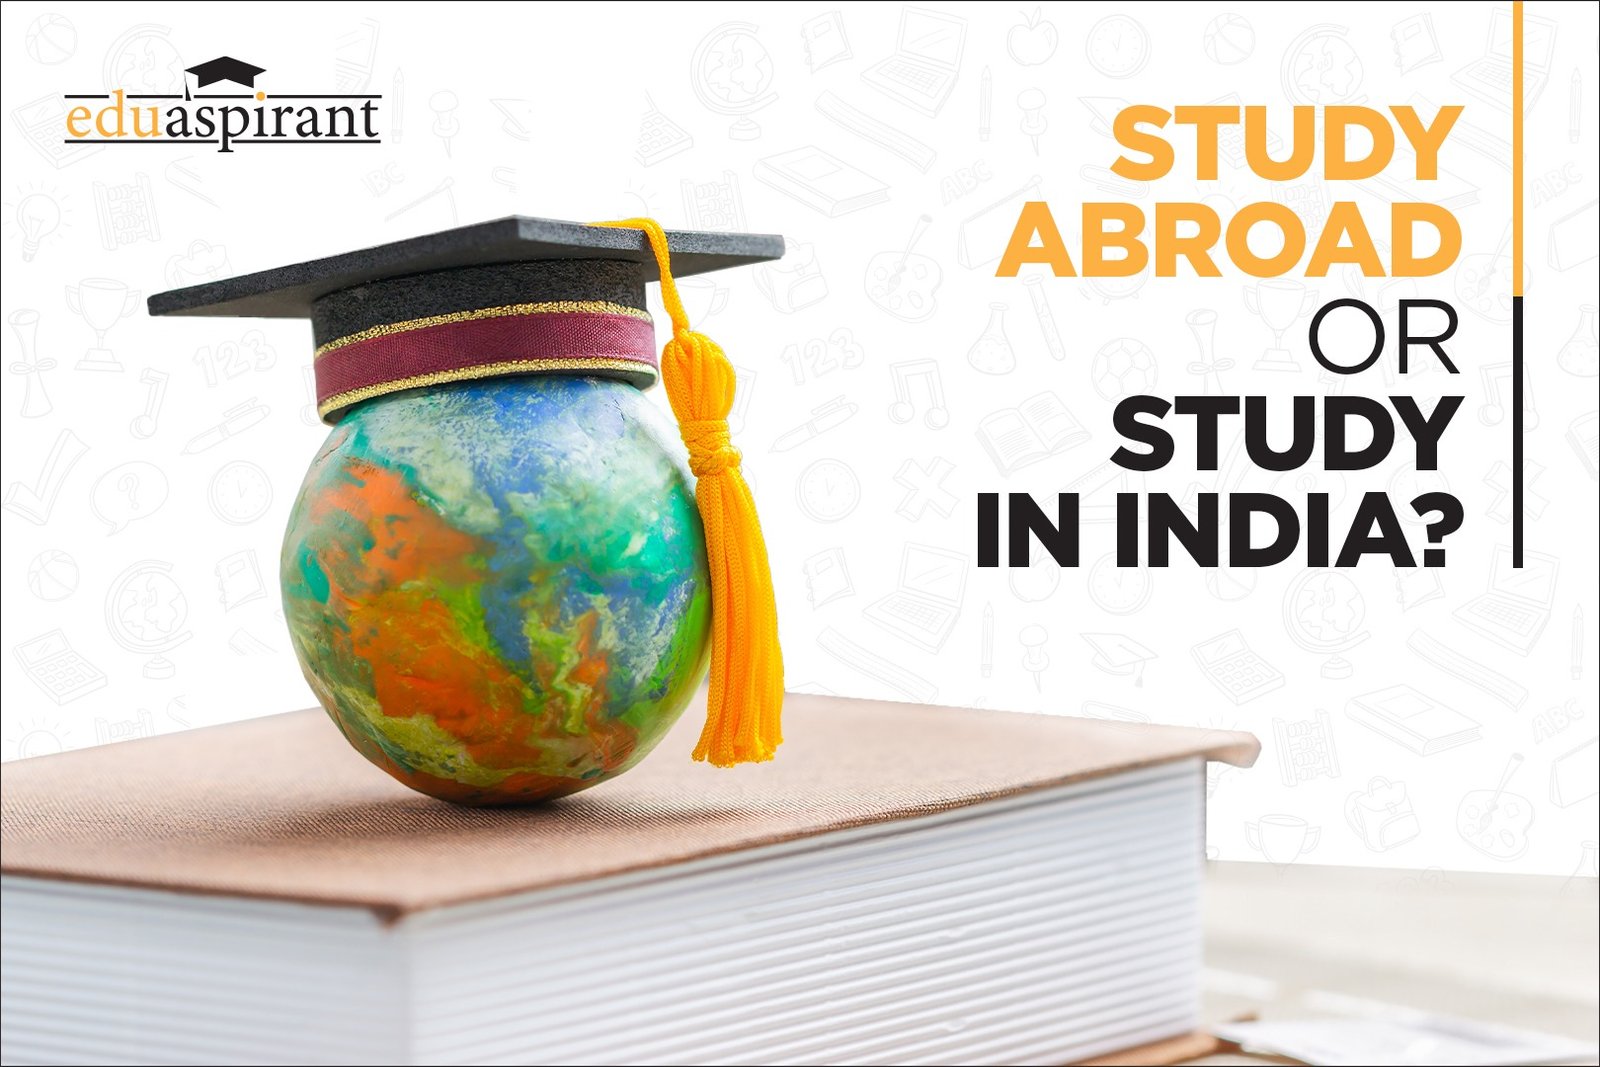 Studying Abroad vs Studying in India – What are the differences?